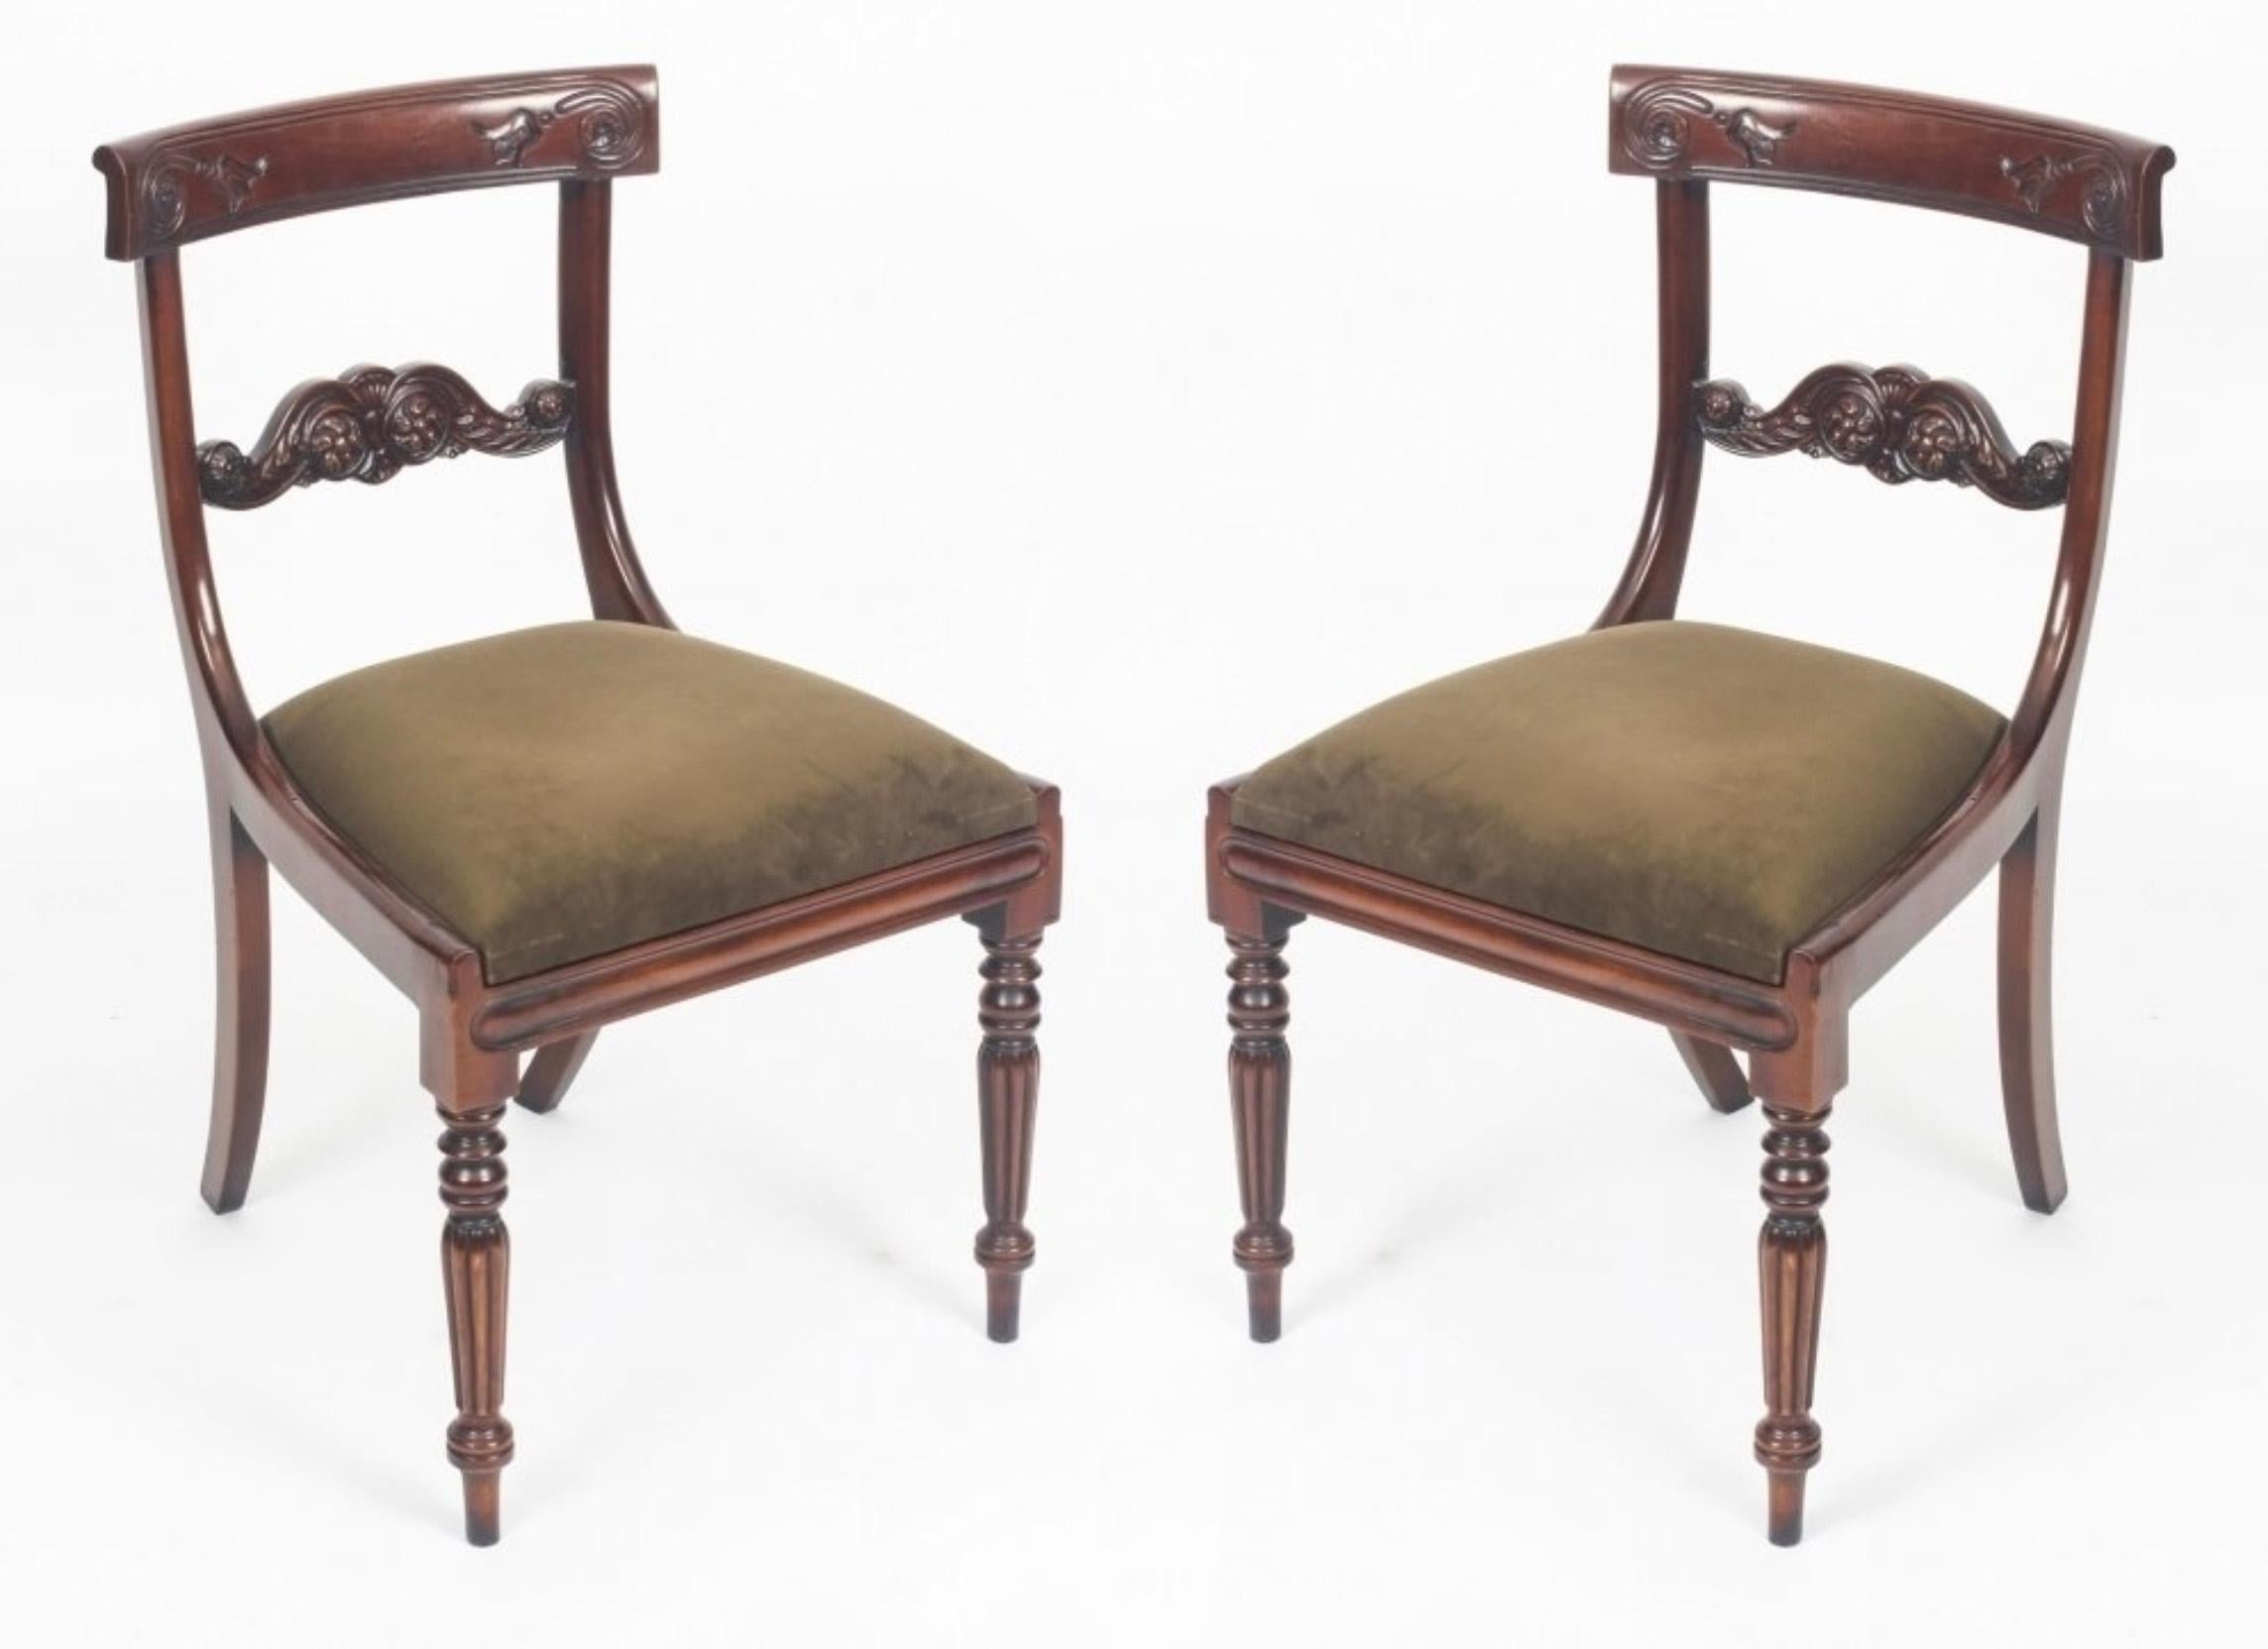 Vintage Pair Regency Revival Mahogany Bar Back Dining Chairs 20th Century For Sale 5